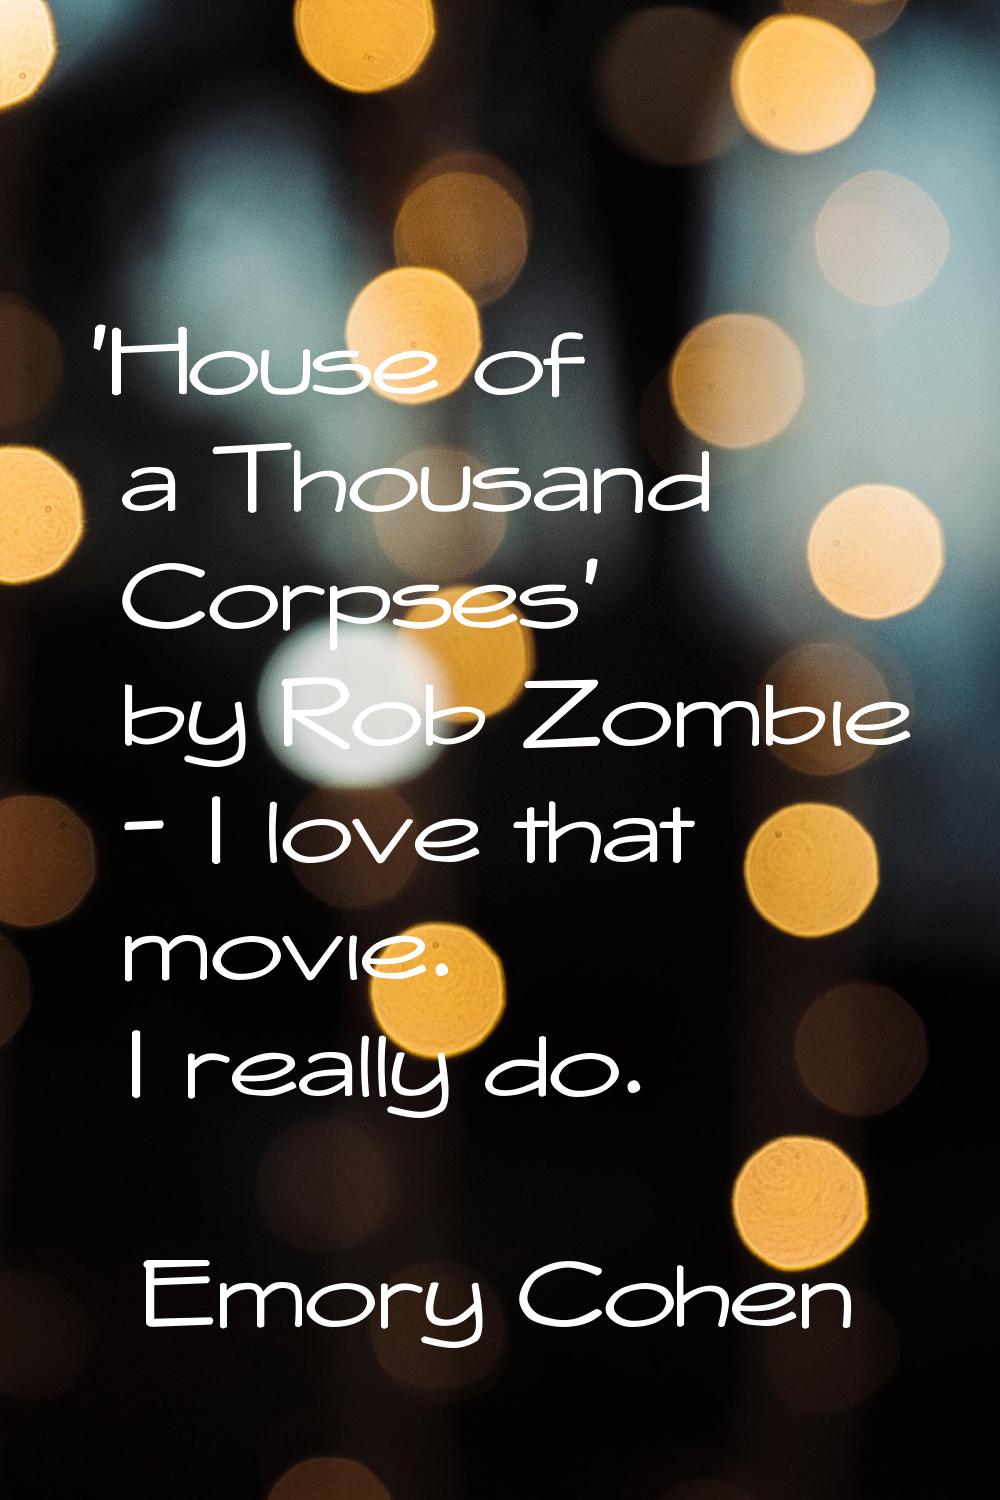 'House of a Thousand Corpses' by Rob Zombie - I love that movie. I really do.